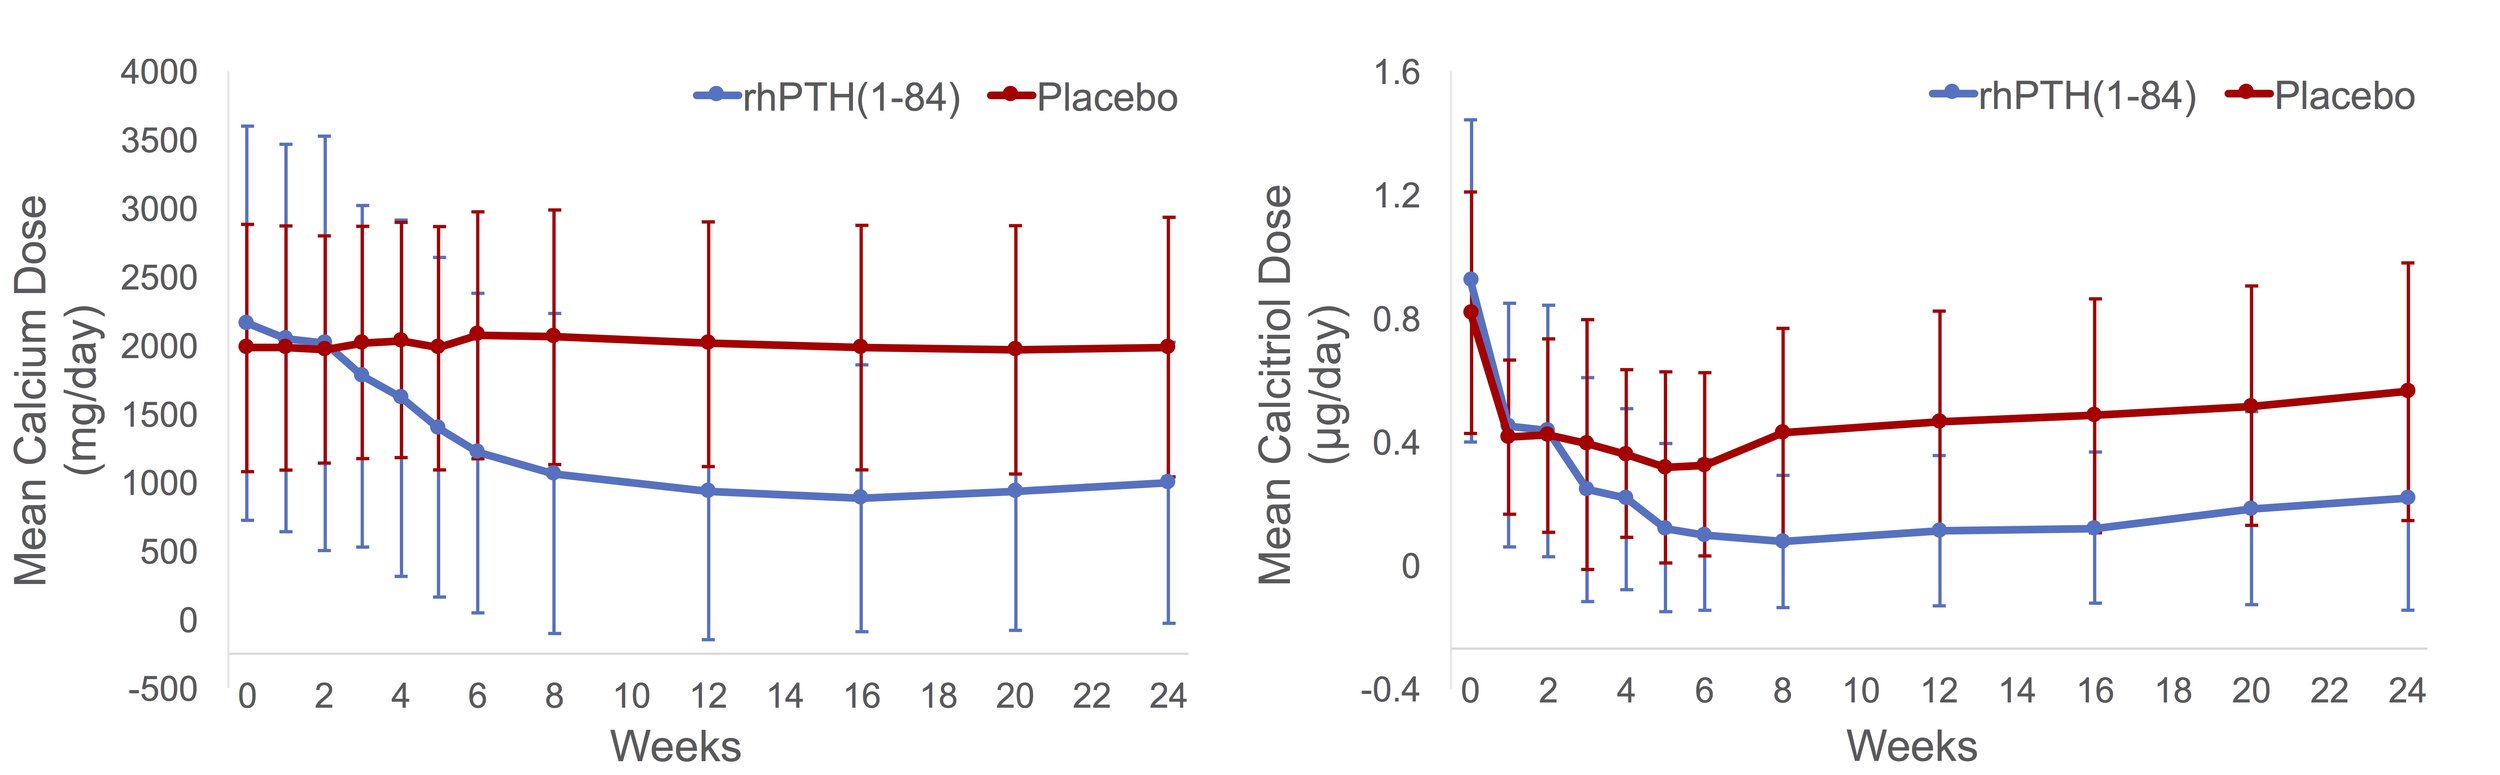 Figure 1: Changes in mean oral calcium and calcitriol doses throughout the REPLACE study in patients receiving rhPTH(1-84) vs. placebo [8]. Graphs are constructed from original study data.